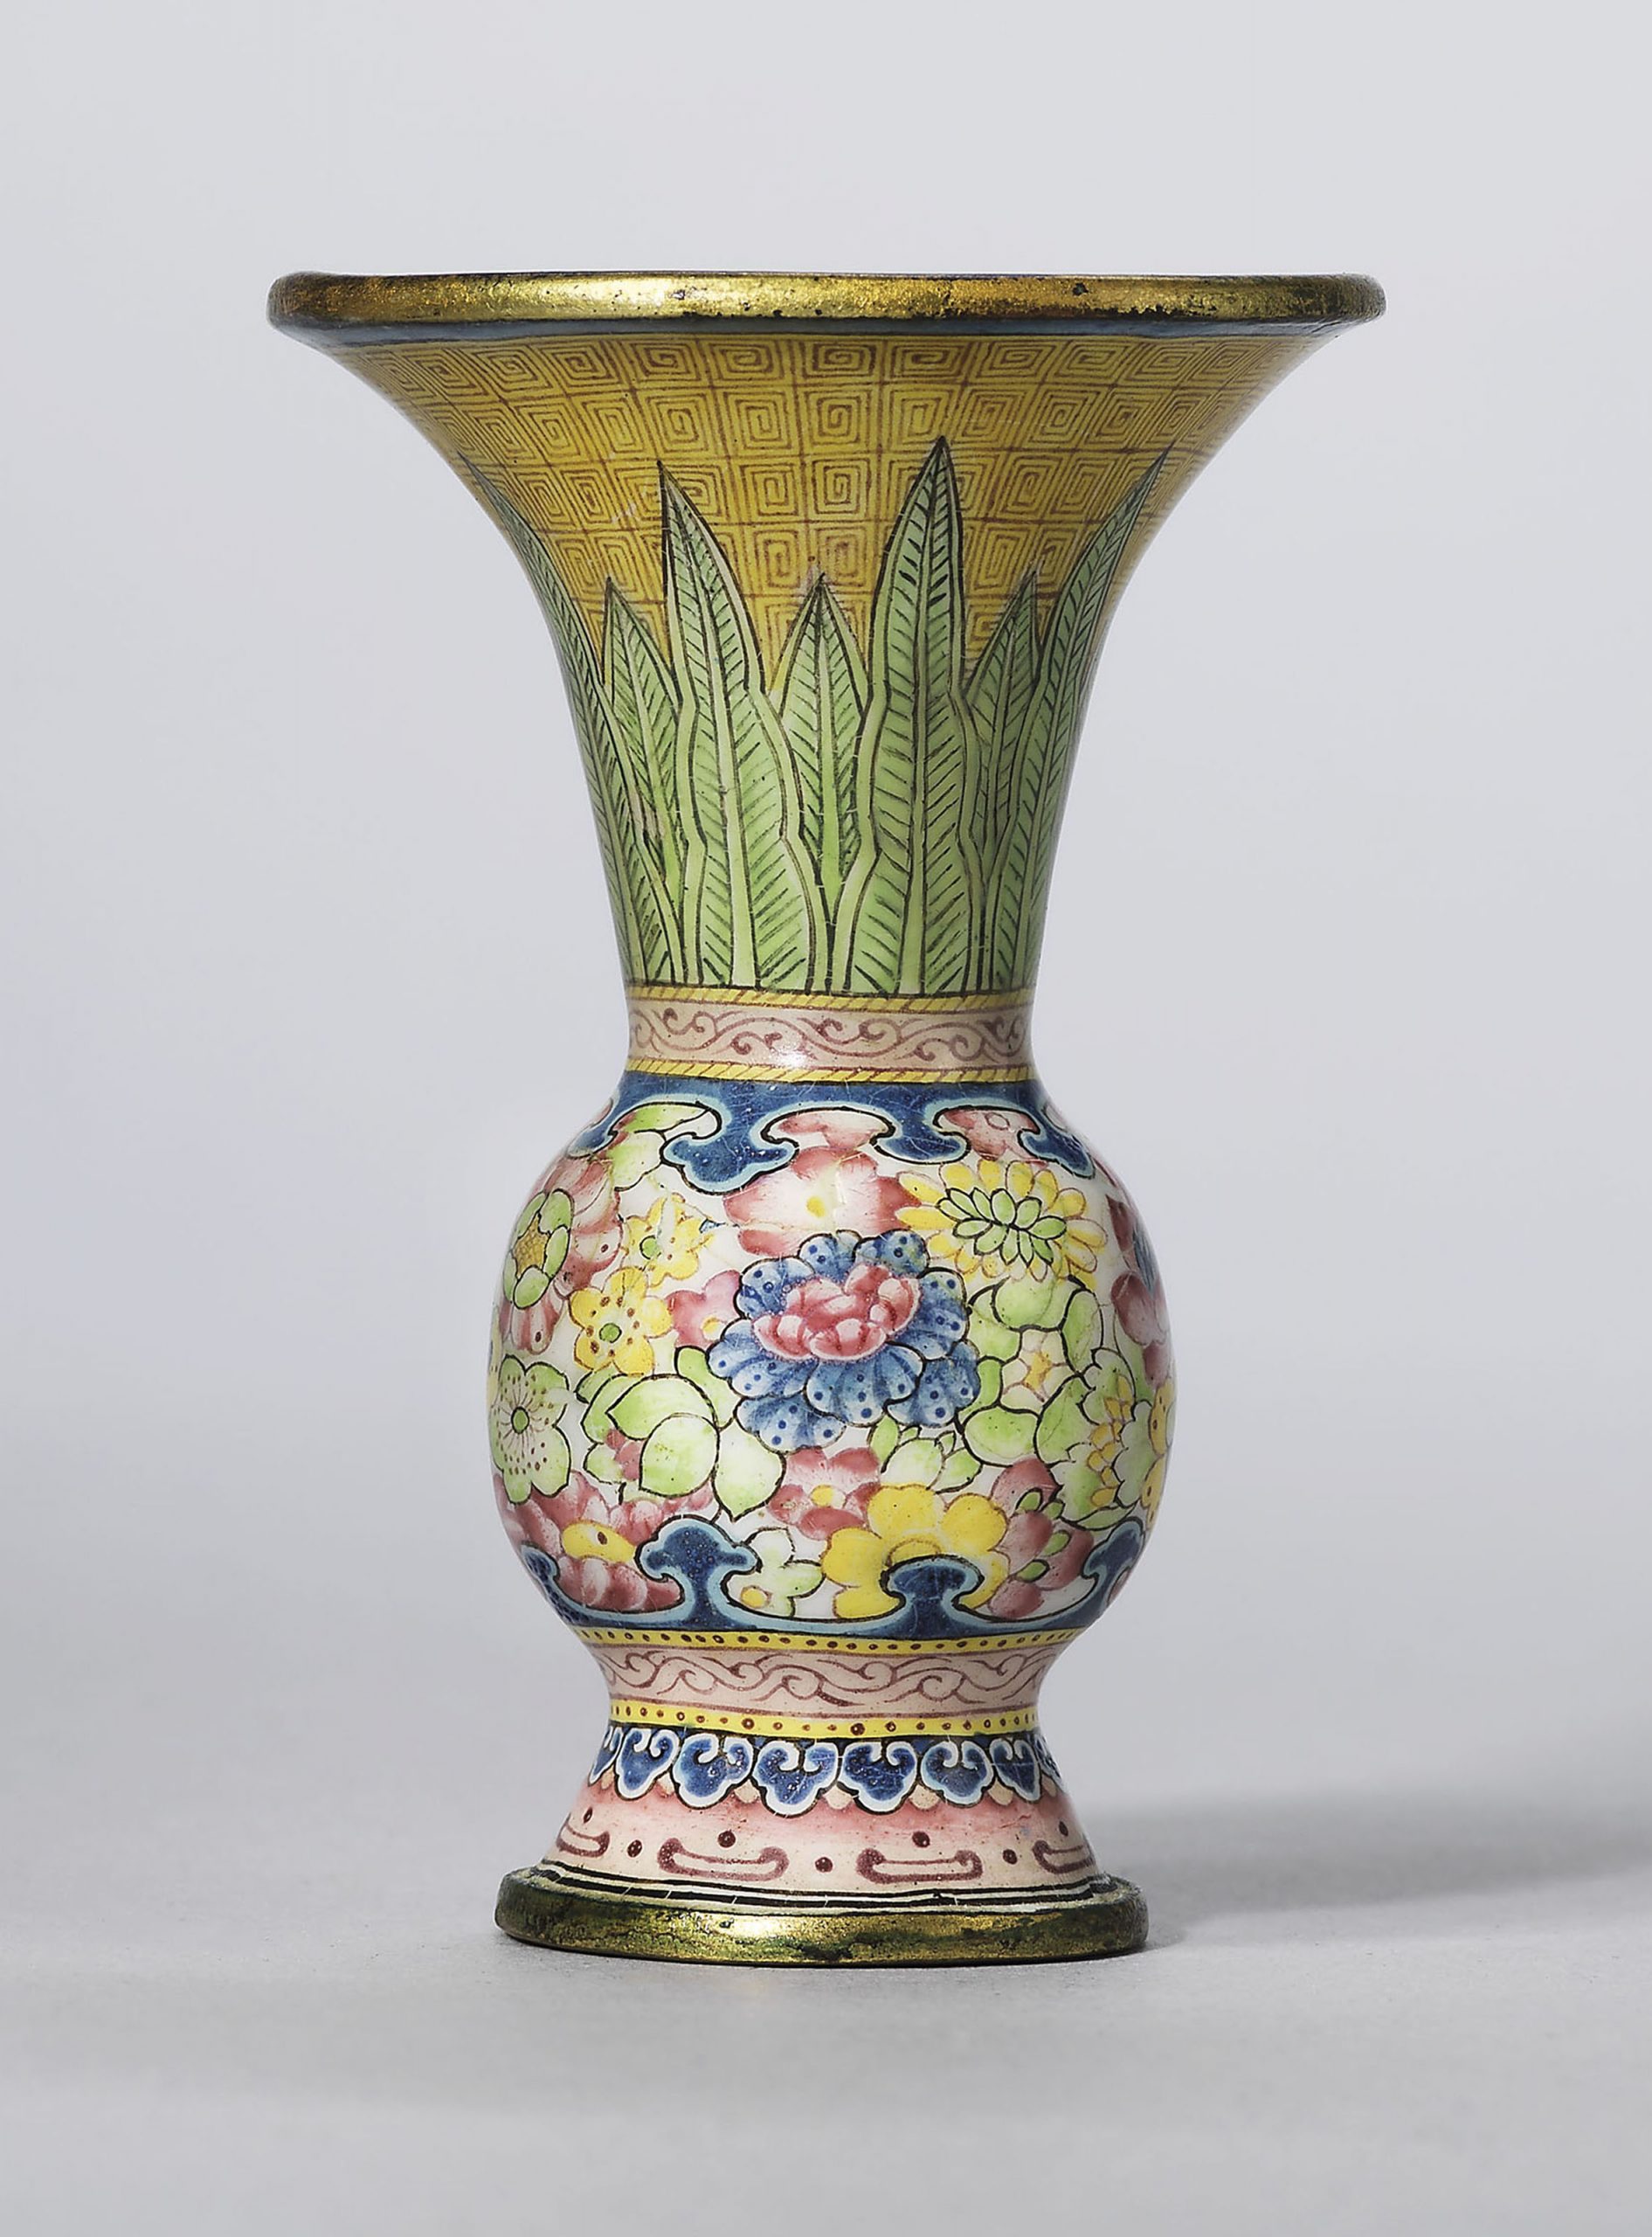 A Guide To The Symbolism Of Flowers On Chinese Ceramics intended for size 2364 X 3200